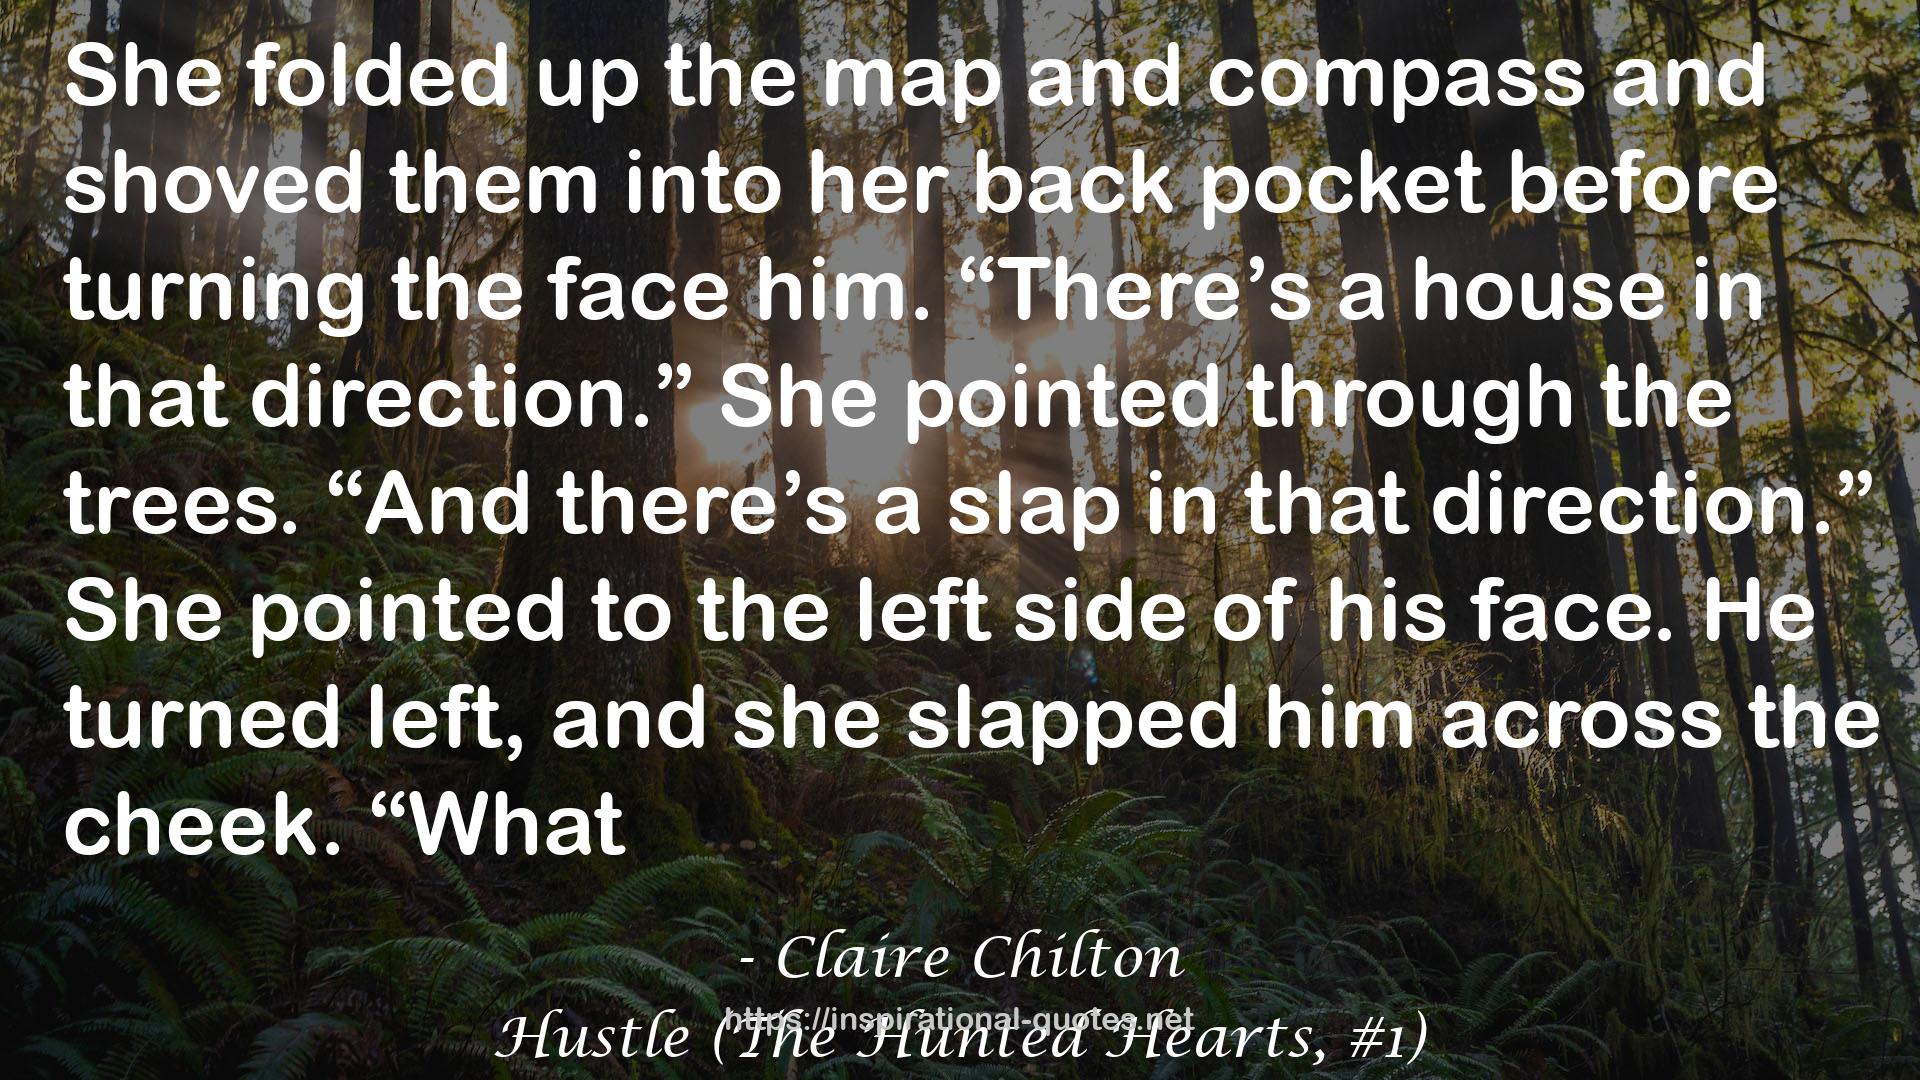 Hustle (The Hunted Hearts, #1) QUOTES